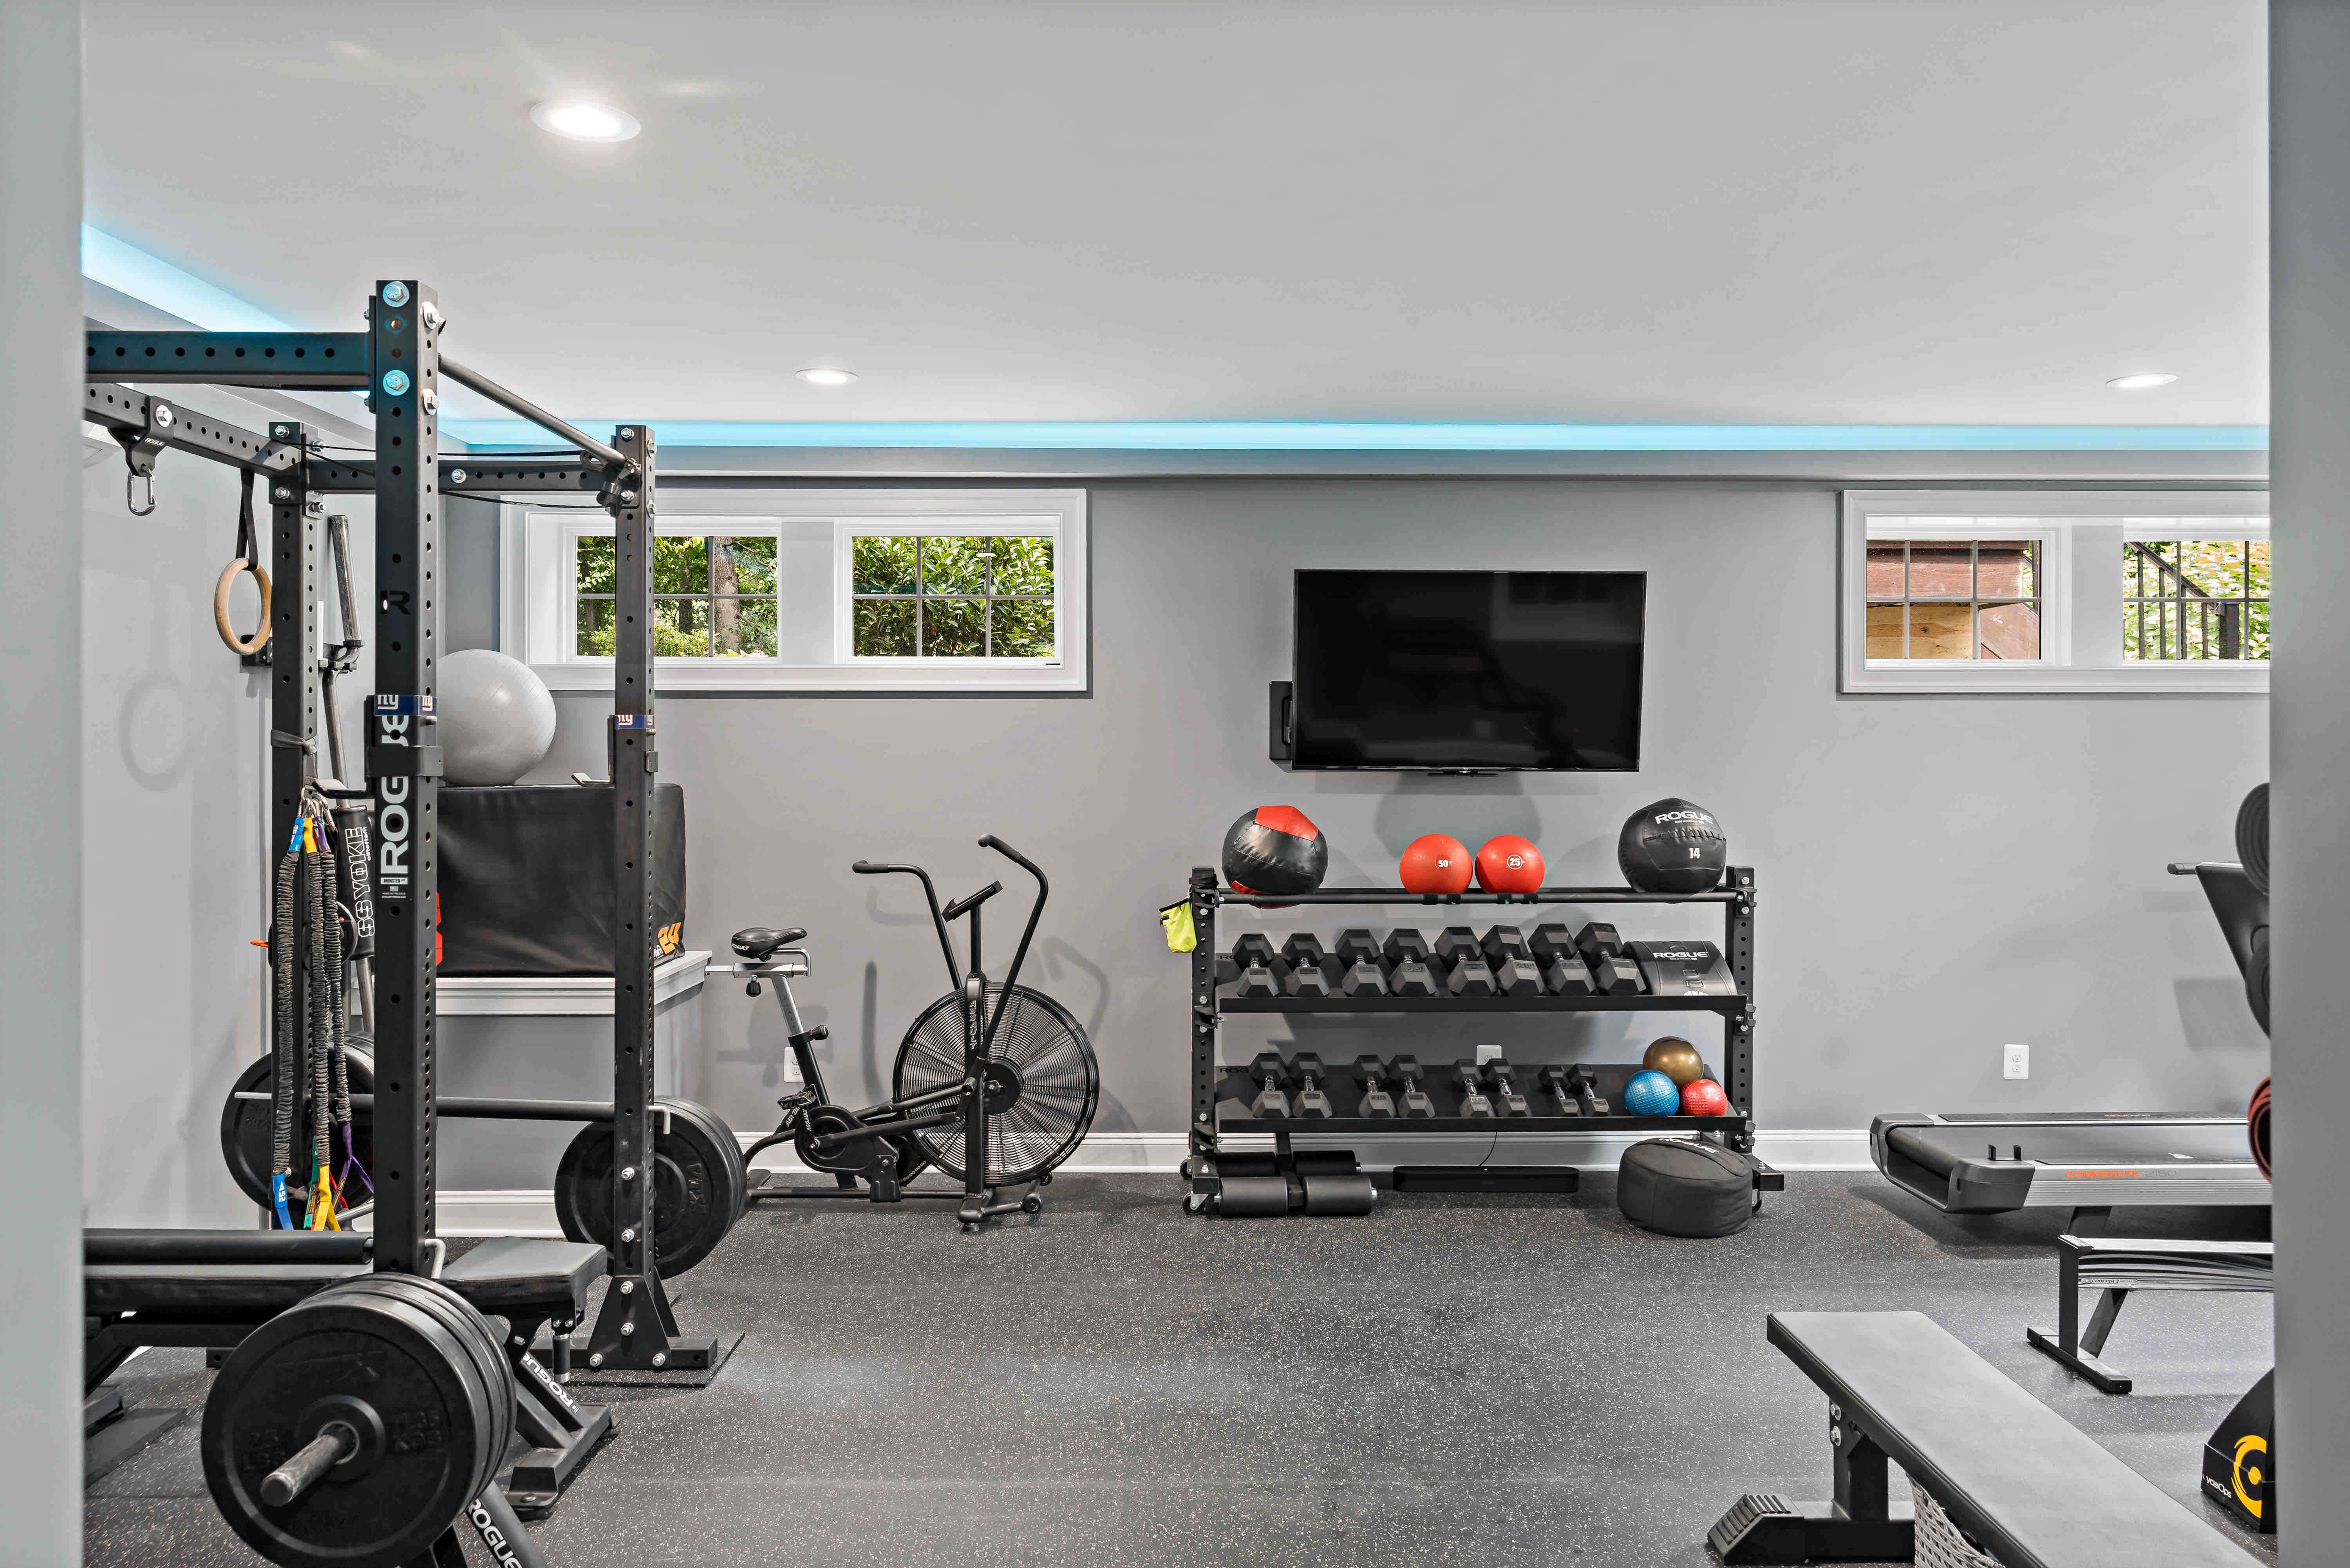 In home gym with blue led lights framing ceiling